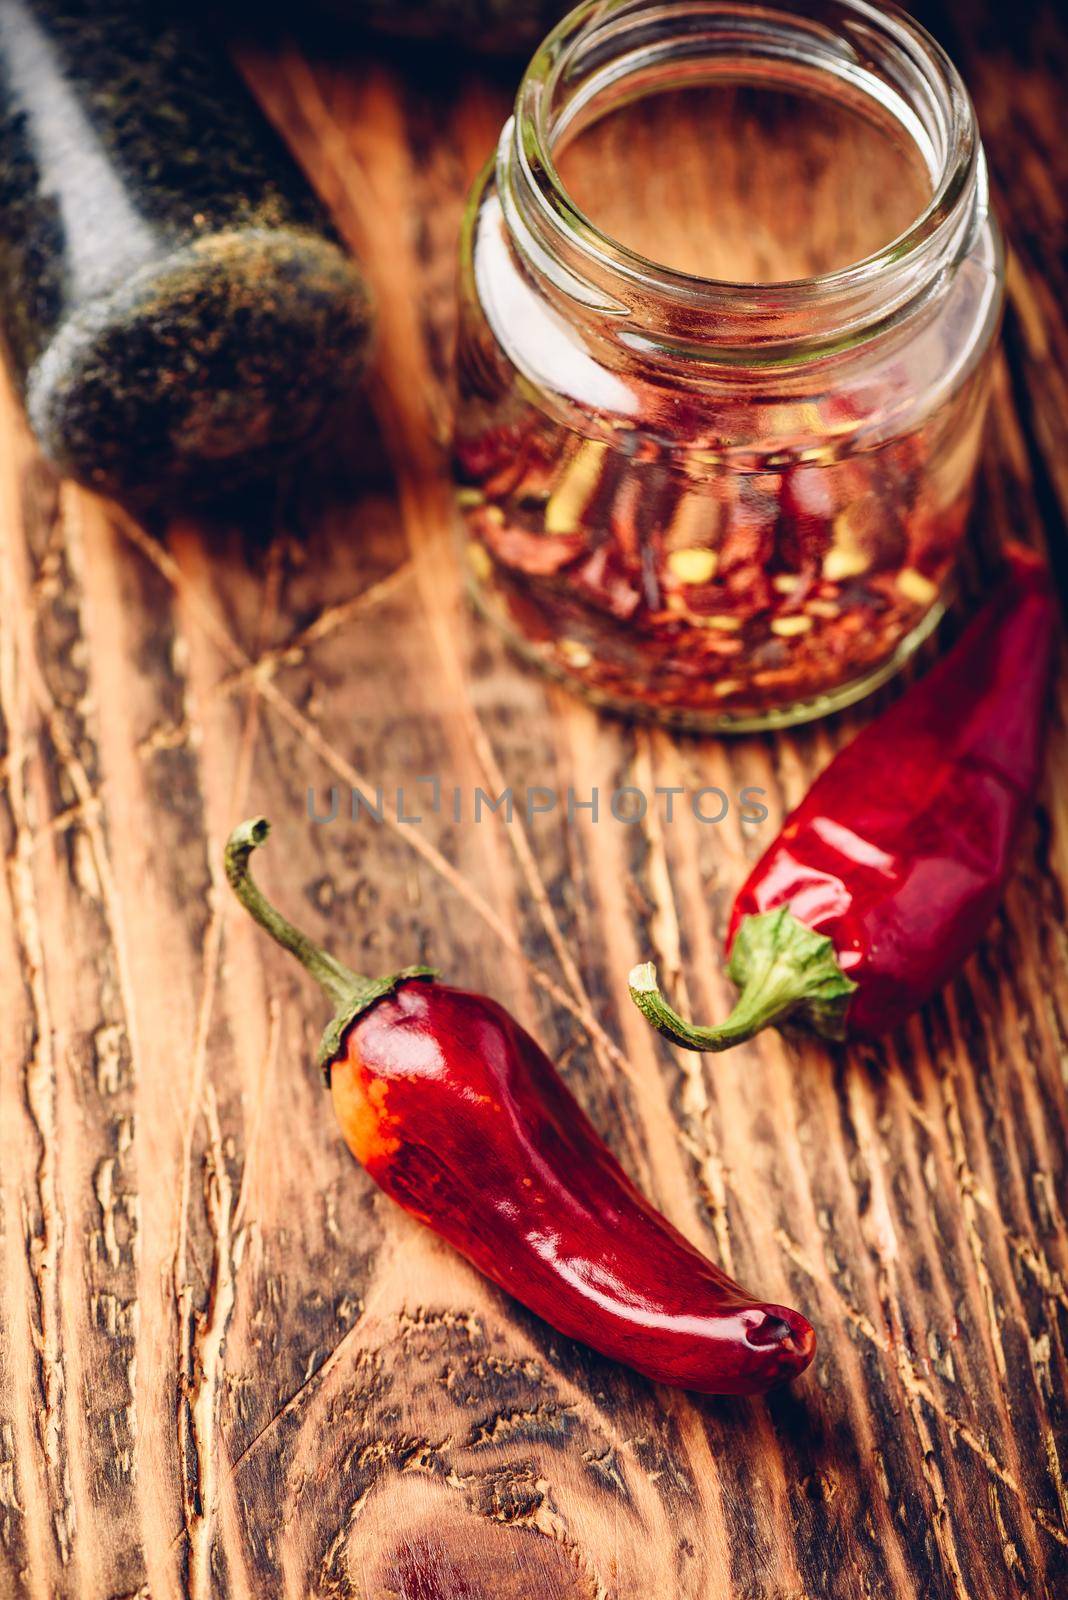 Dried red chili peppers on wooden surface by Seva_blsv